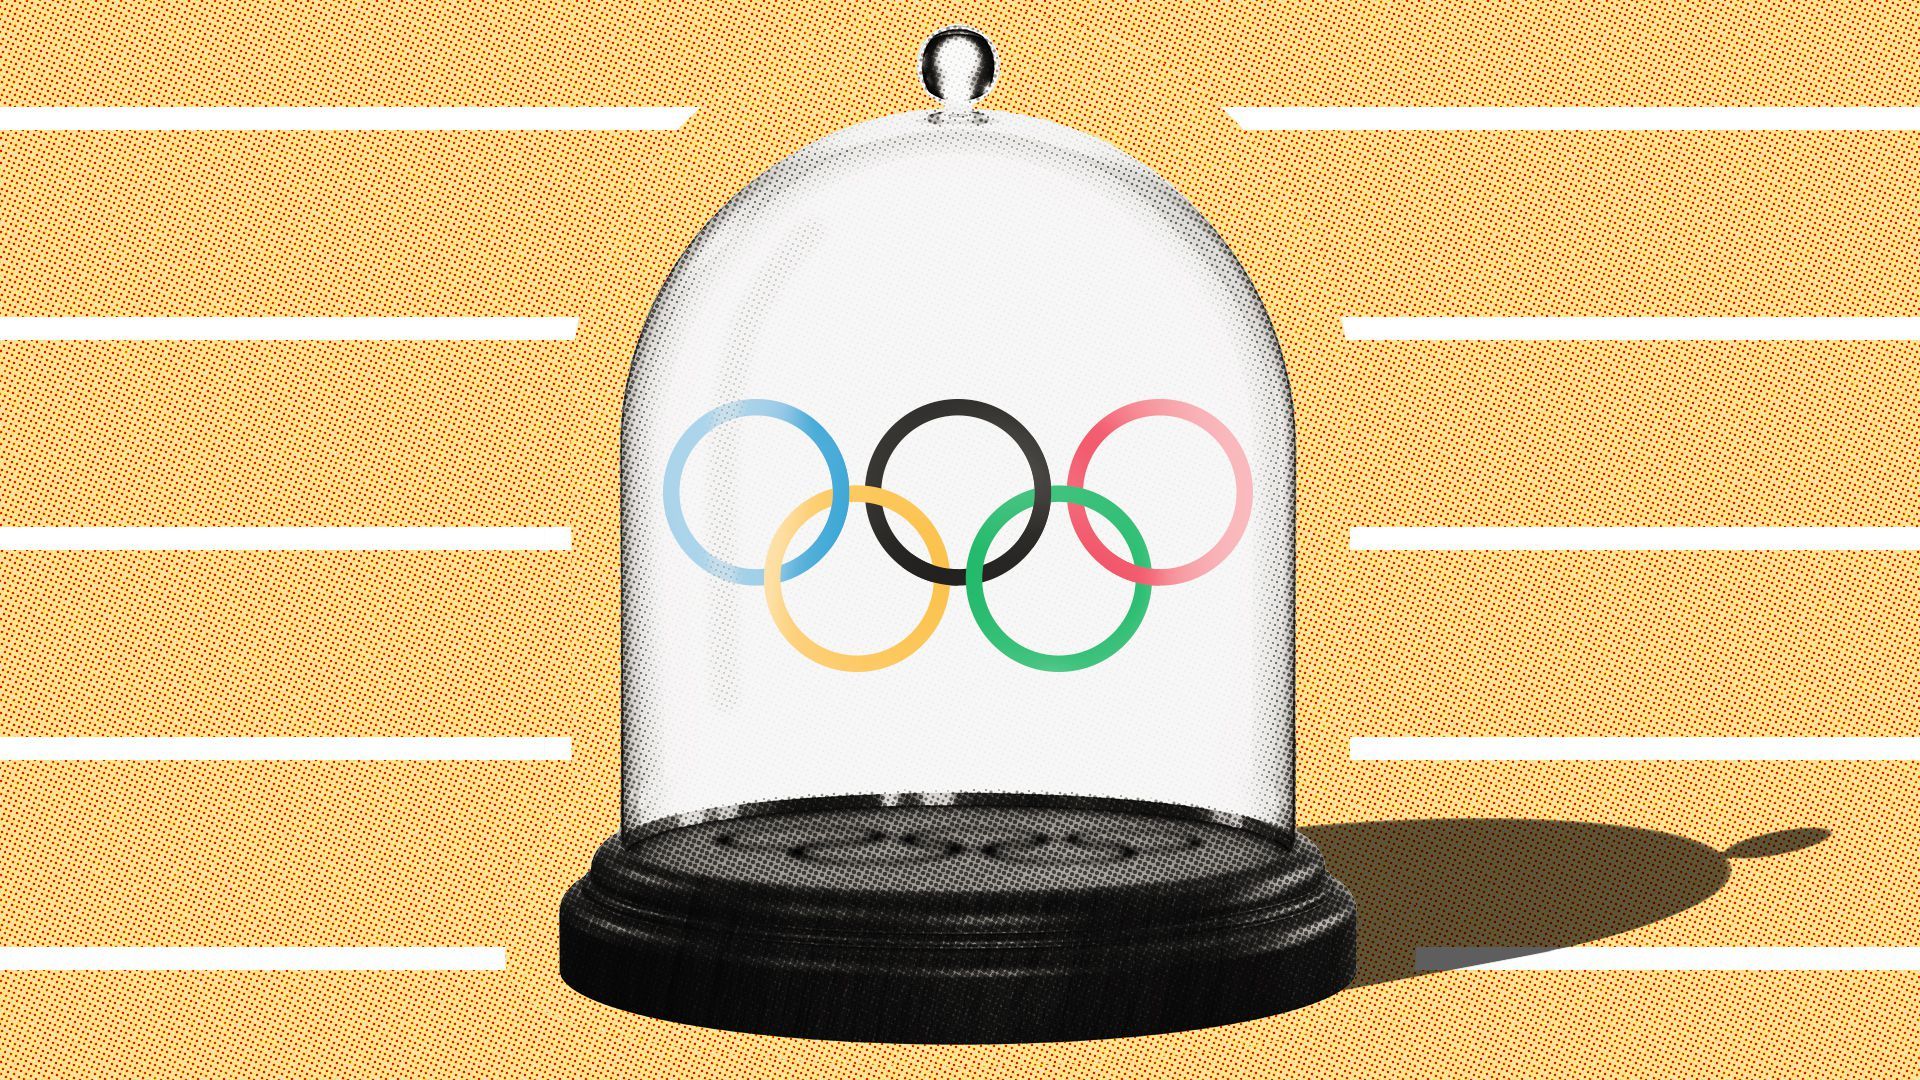 Illustration of the Olympics rings trapped in a bell jar.